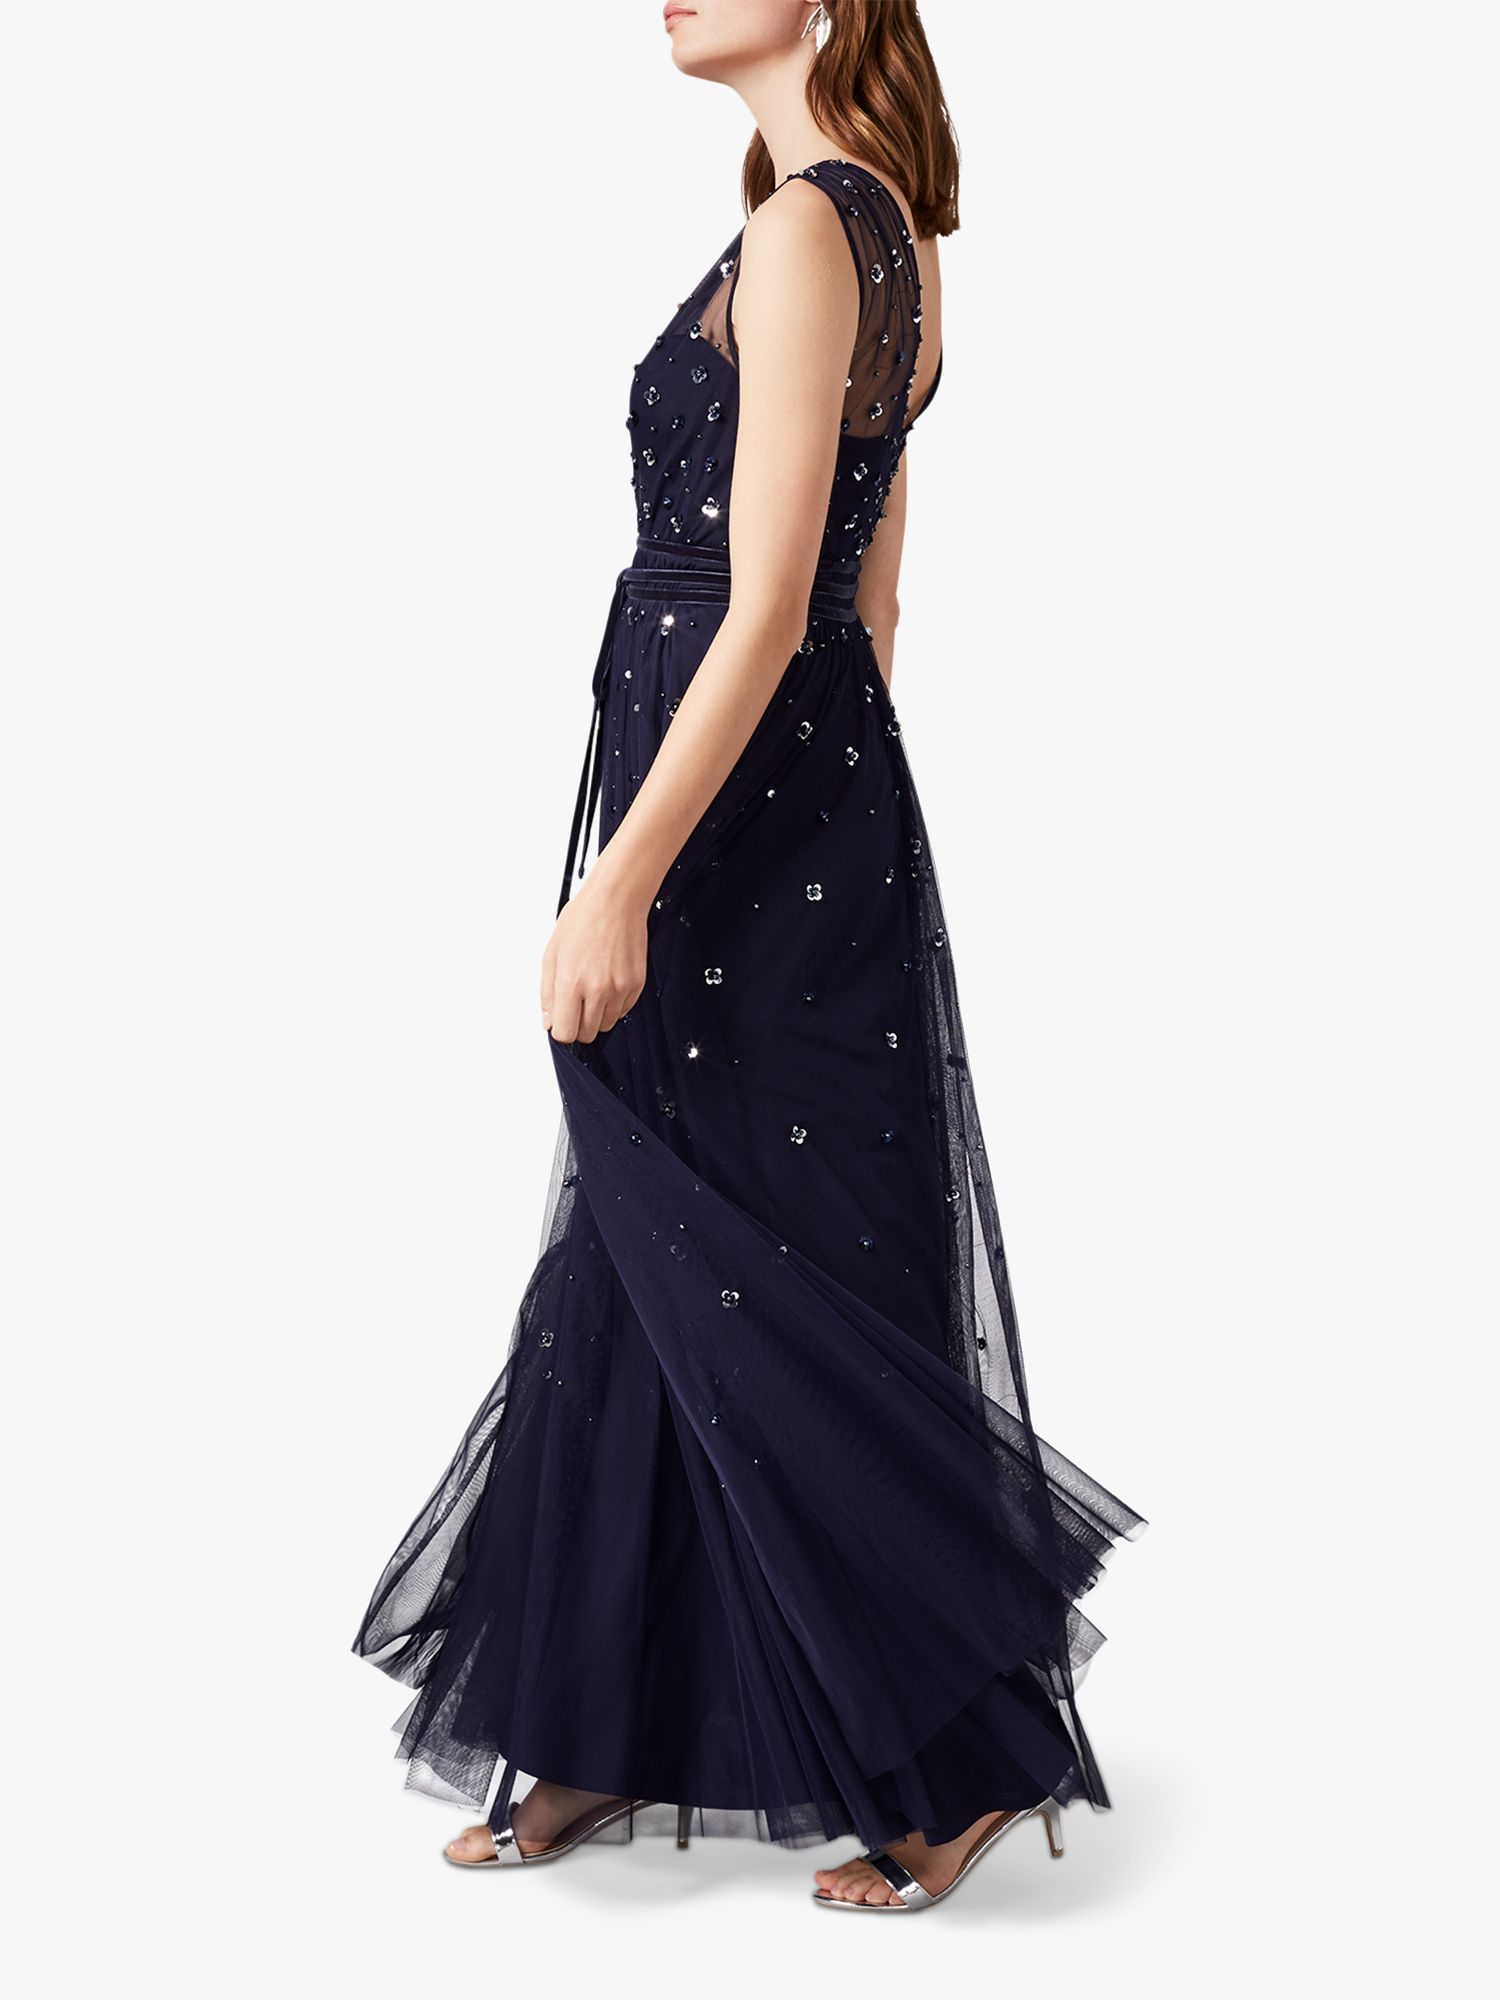 Phase Eight Marcia Sequin Tulle Dress, Midnight at John Lewis